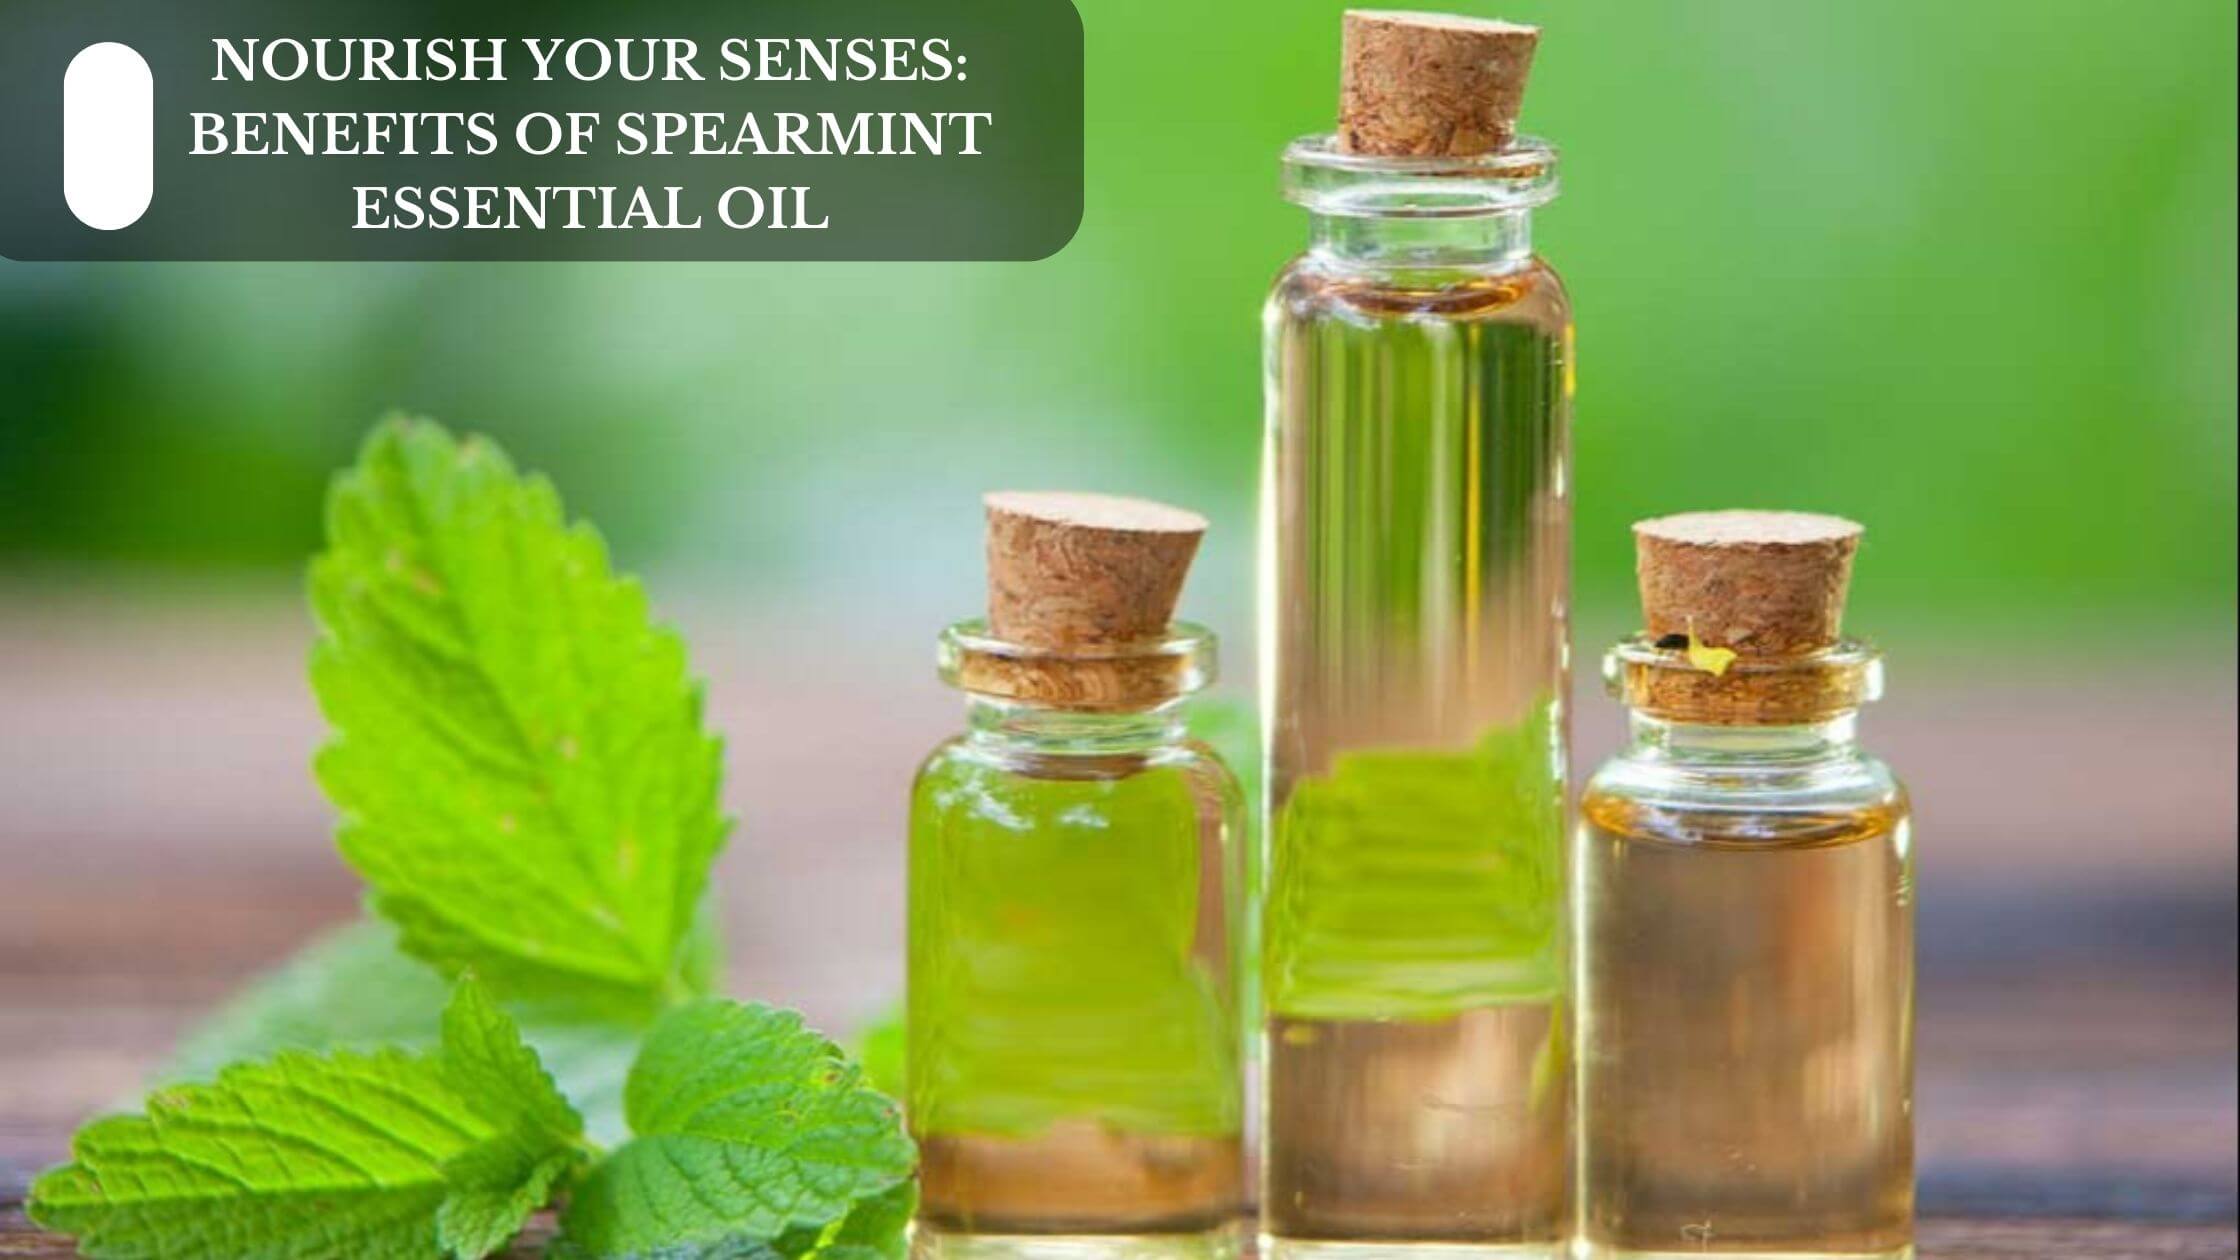 Describe the Several Benefits of Spearmint Oil